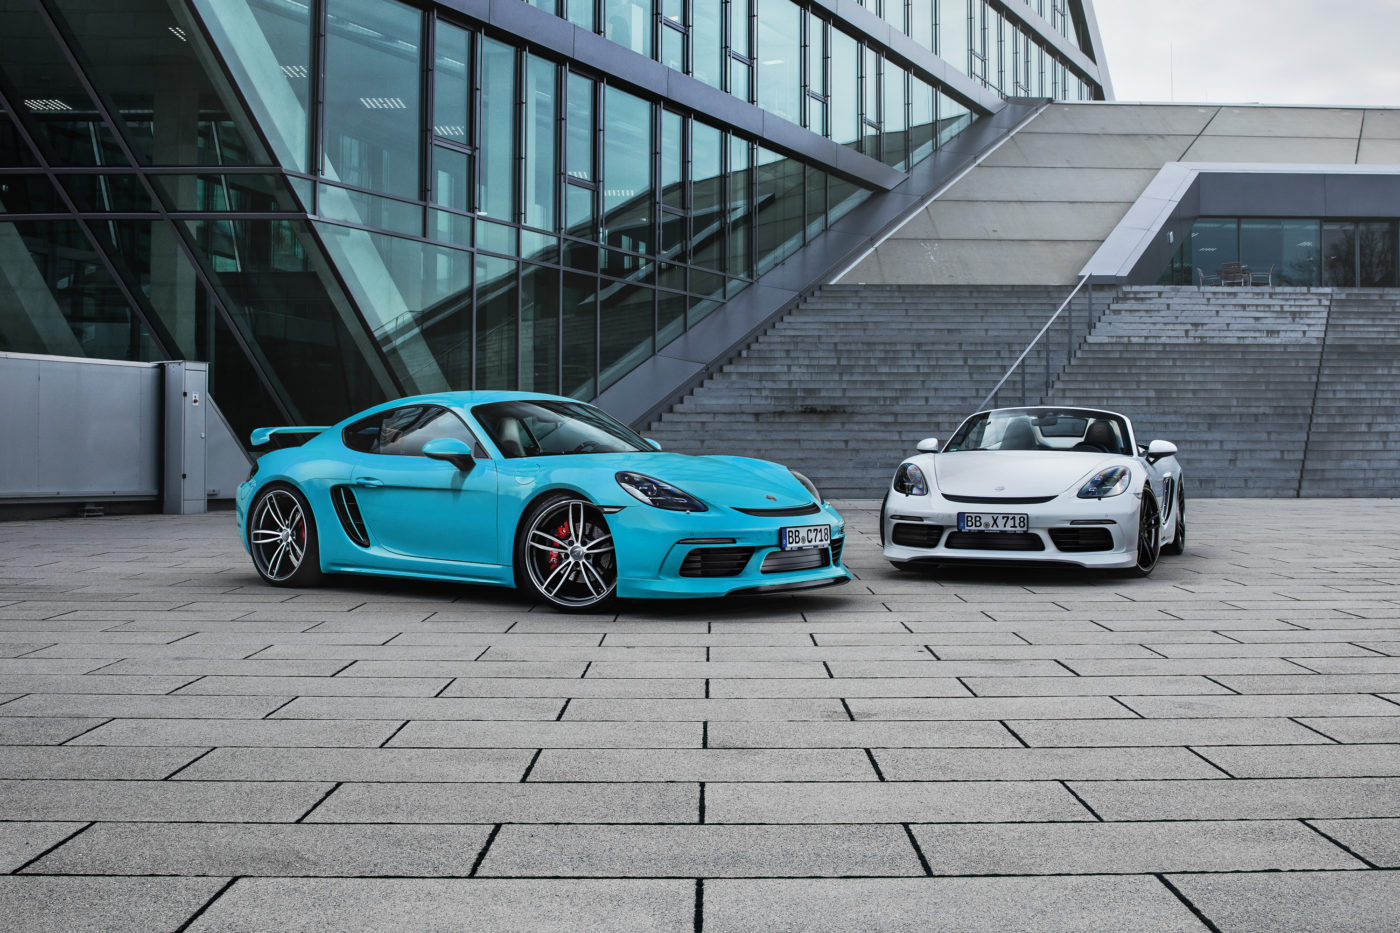 Porsche Cayman Boxster Techart Tuning, two vehicles in bright cyan and white.